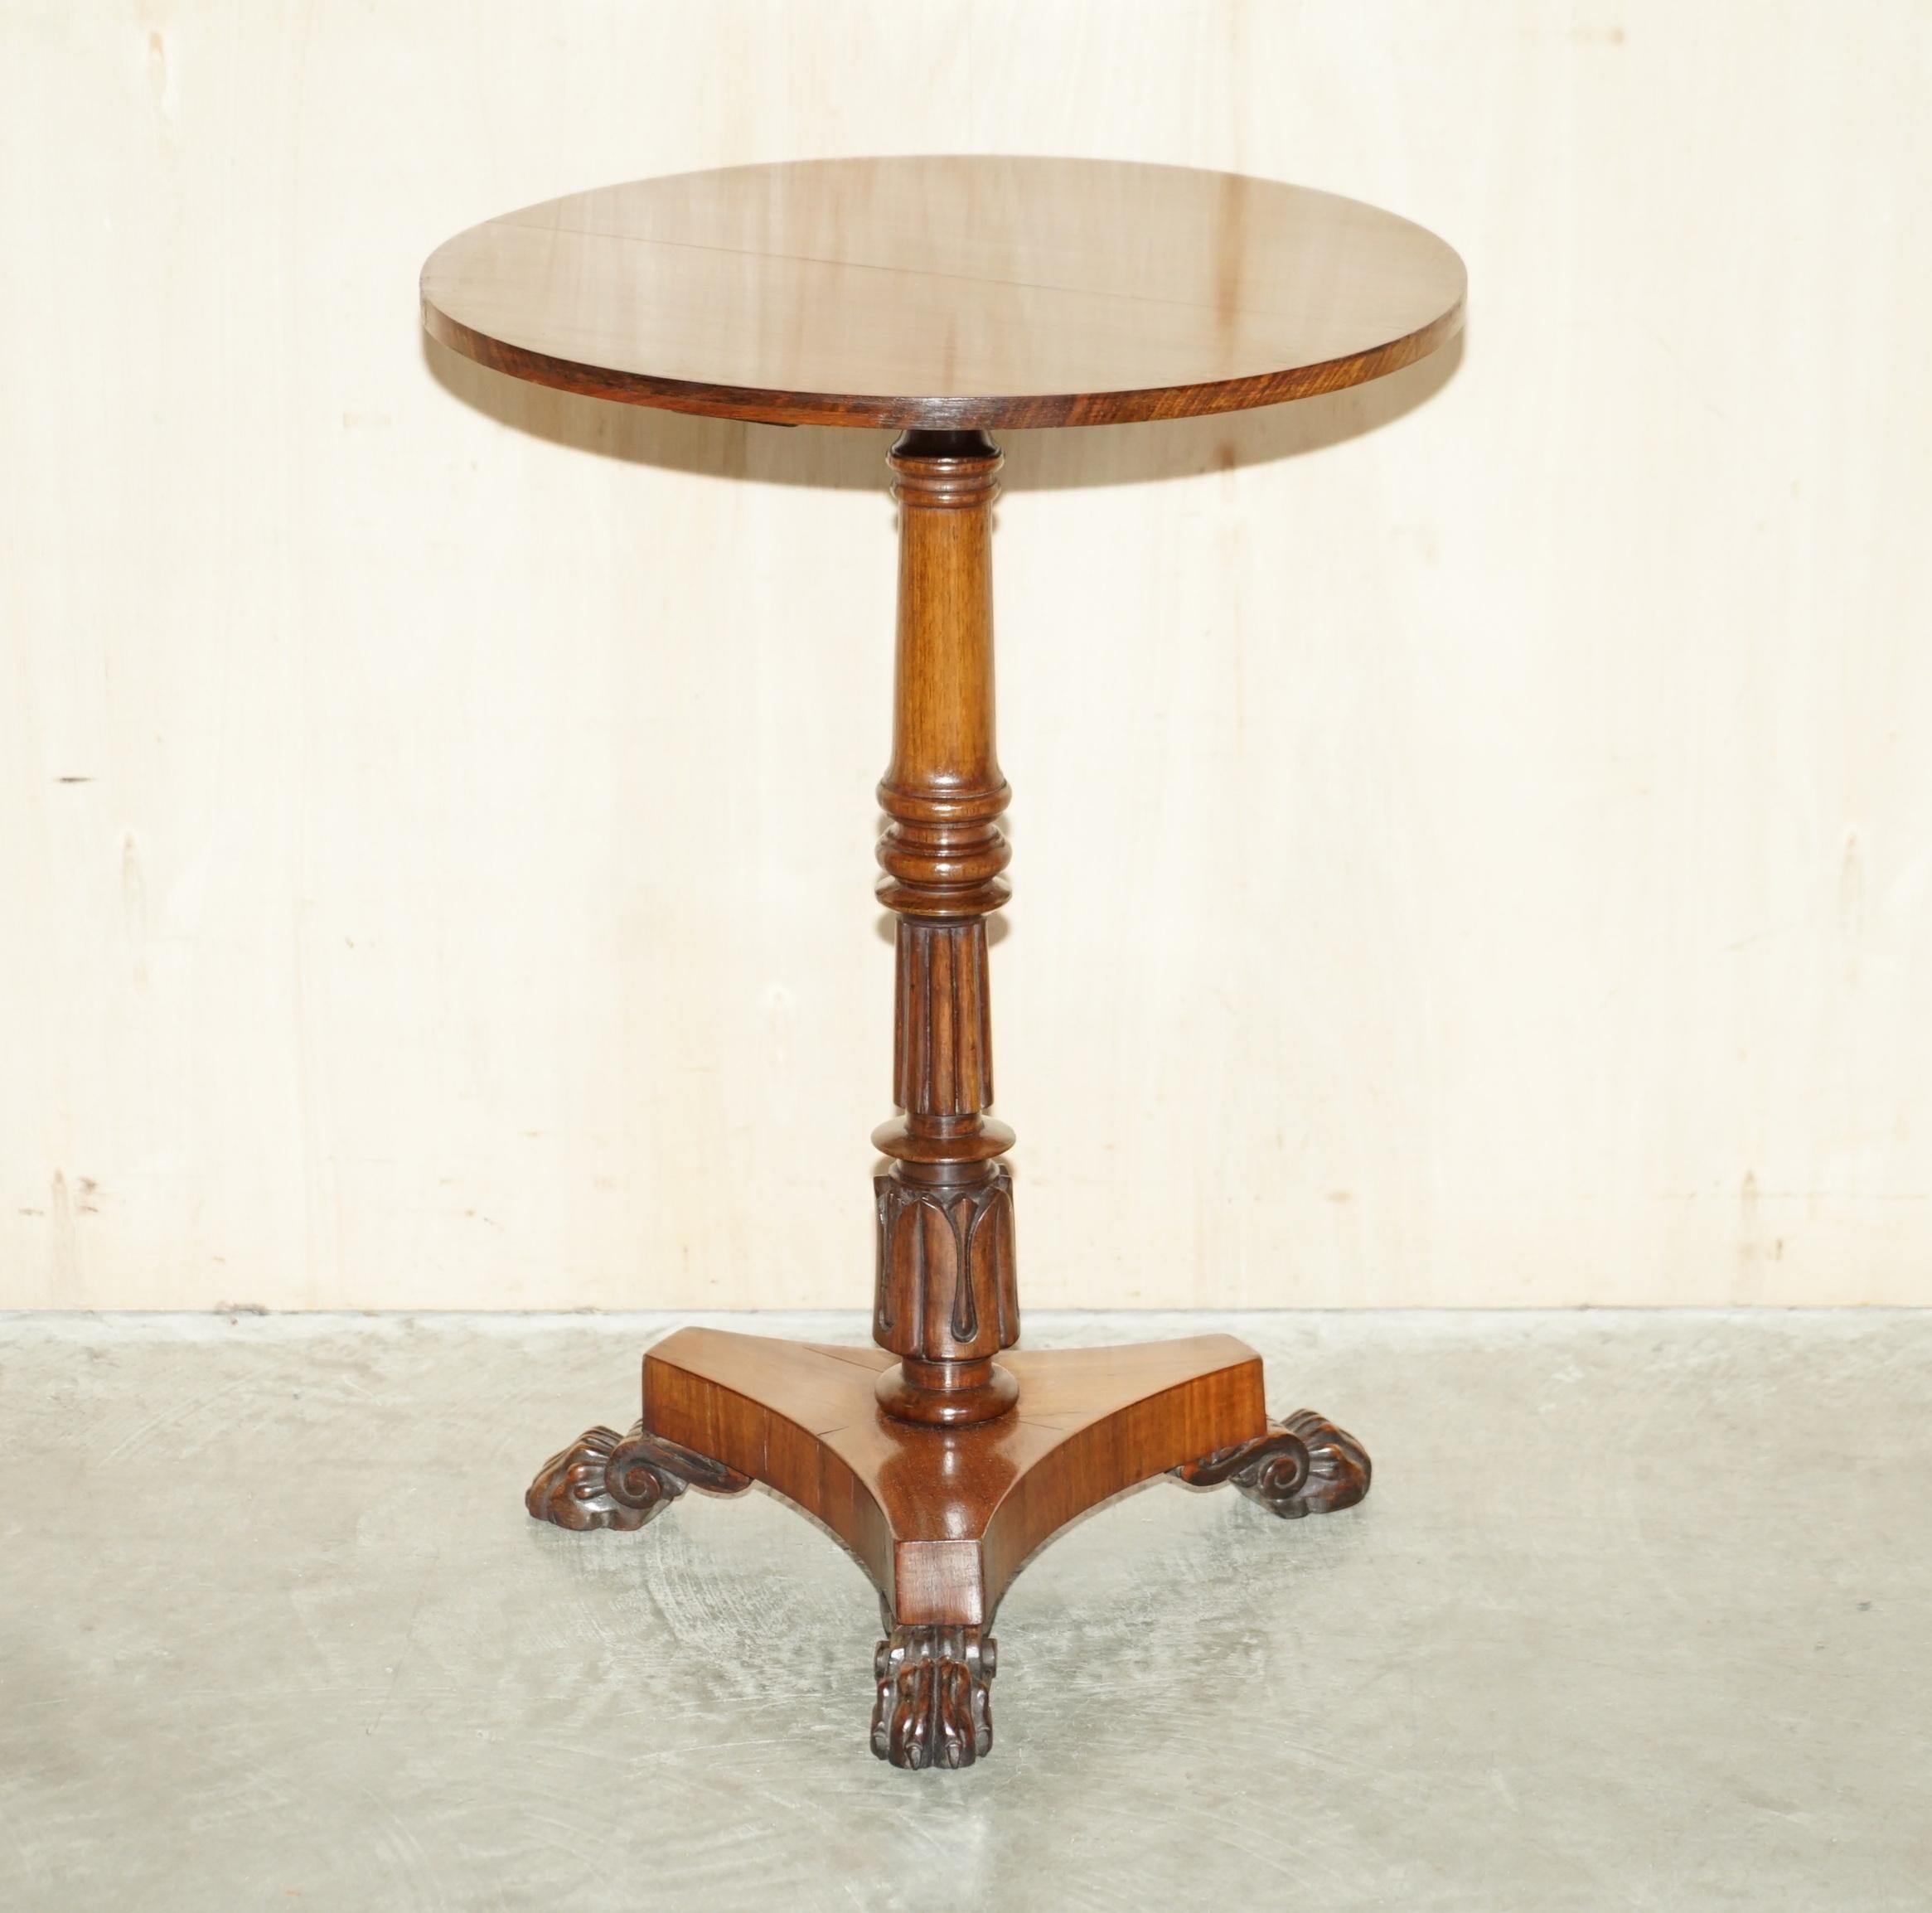 We are delighted to offer for sale this exquisitely carved Antique circa 1830 William IV Mahogany side occasional table.

A very good looking well-made and decorative piece in original condition, the timber patina is glorious, the column has a